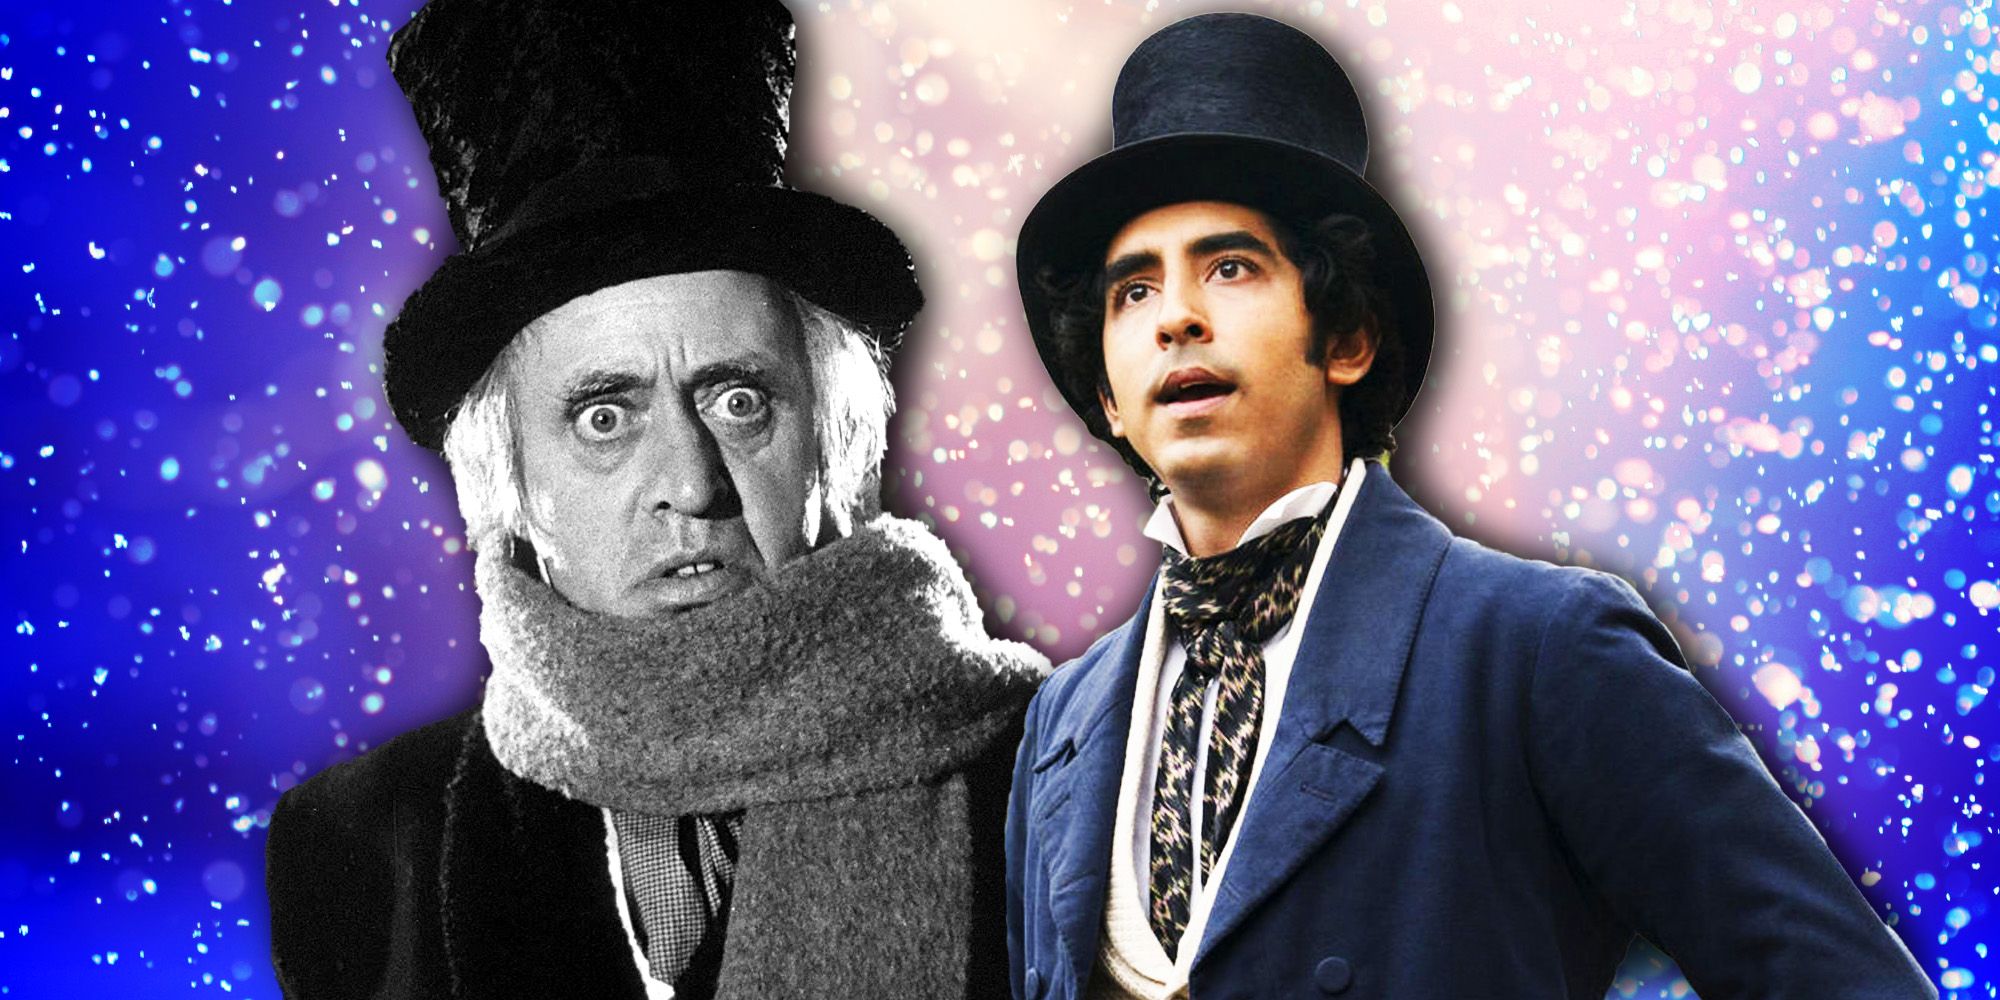 Dev Patel from 2019's A Personal History of David Copperfield, and Alastair Sim from 1951's A Christmas Carol